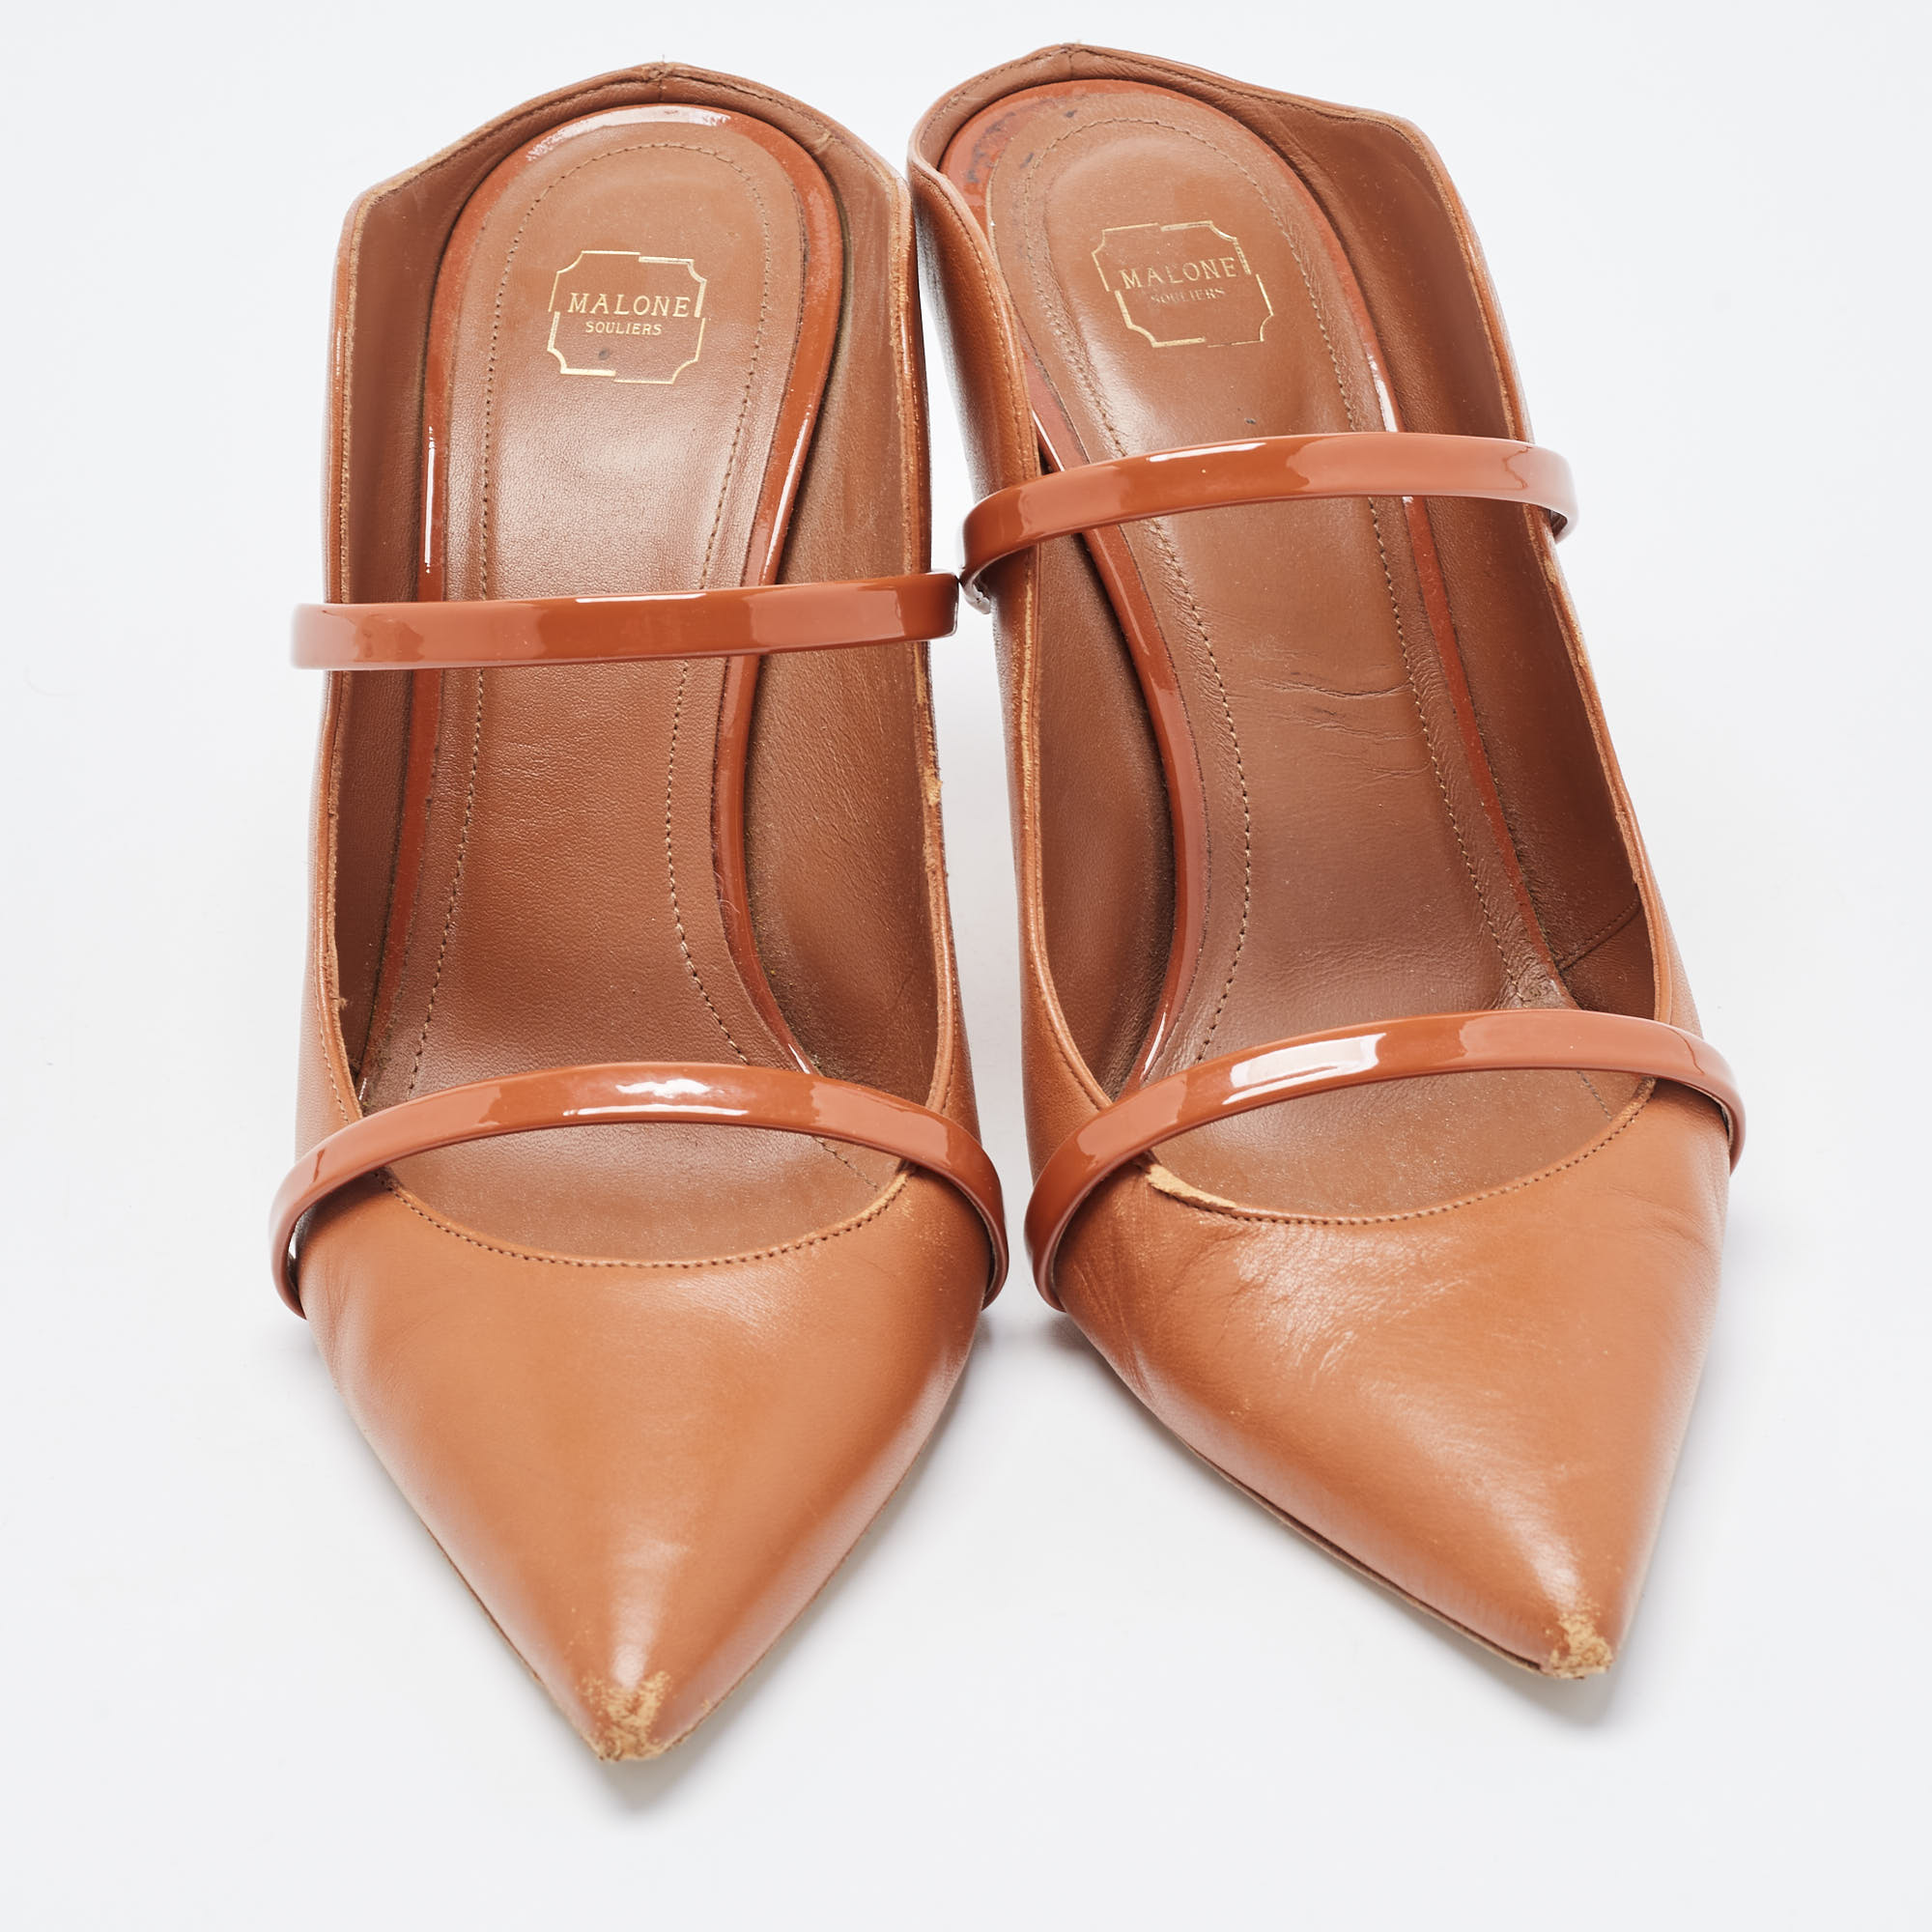 Malone Souliers Tan Leather Maureen Mules Size 39